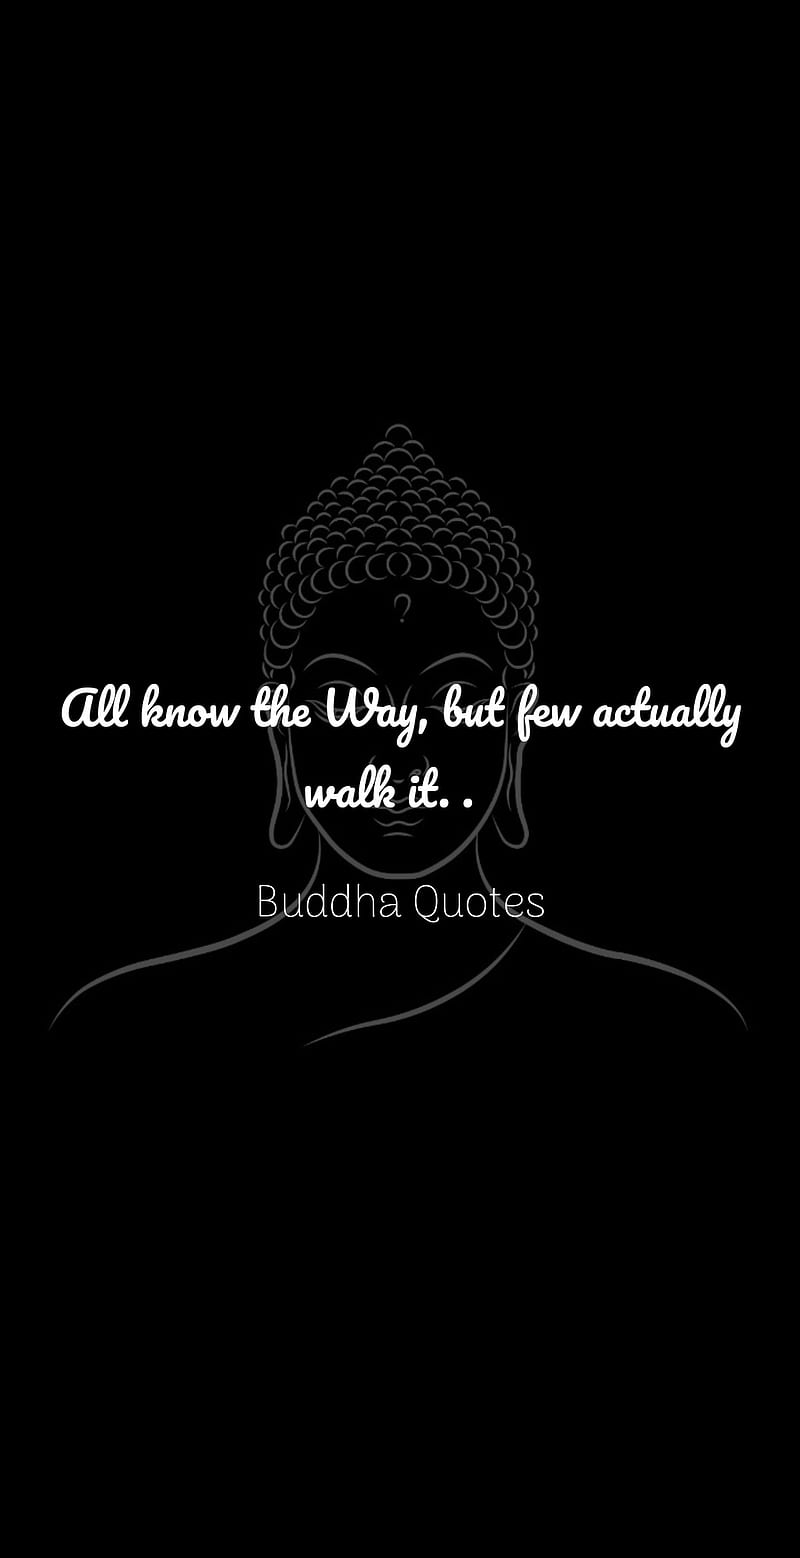 Share more than 83 buddha quotes wallpaper iphone best